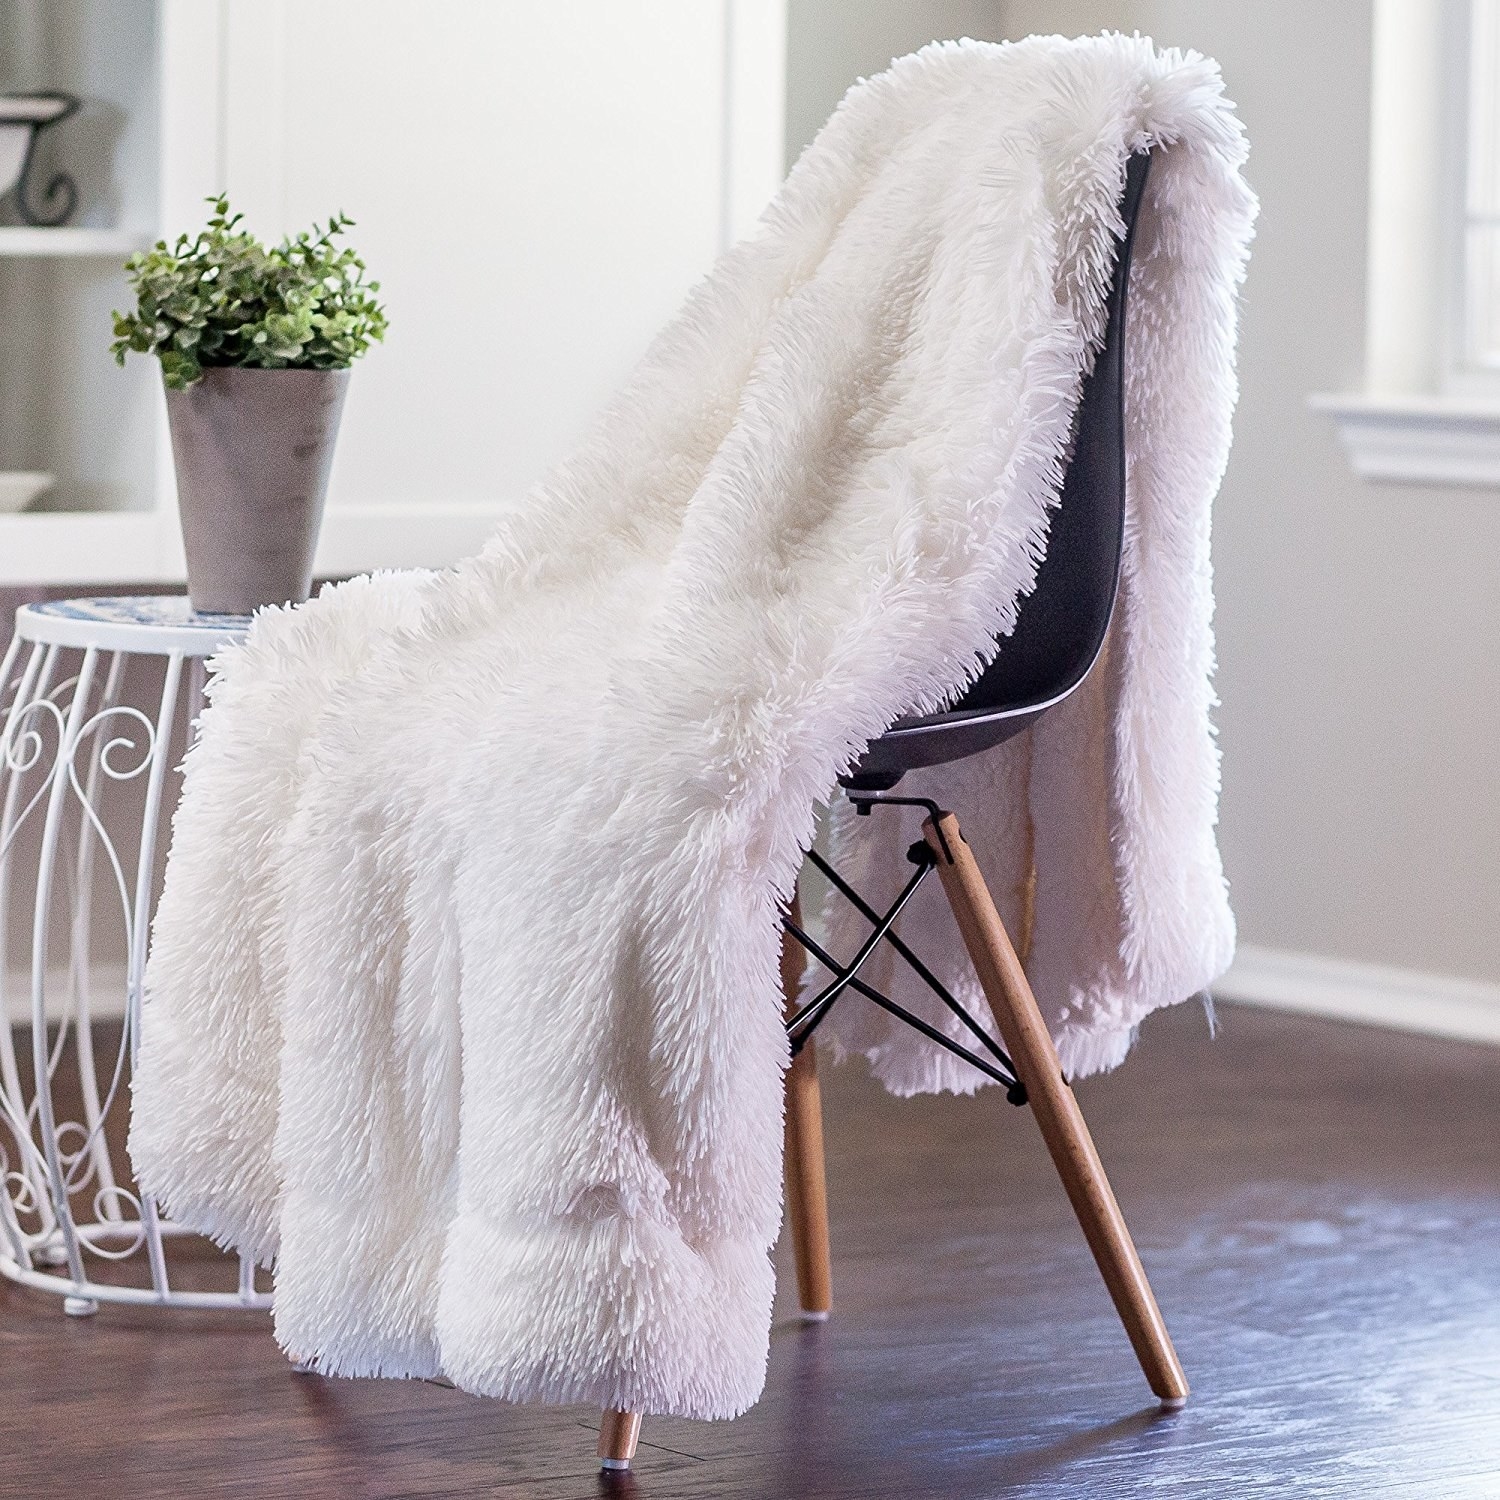 The fuzzy blanket in white sitting on a chair